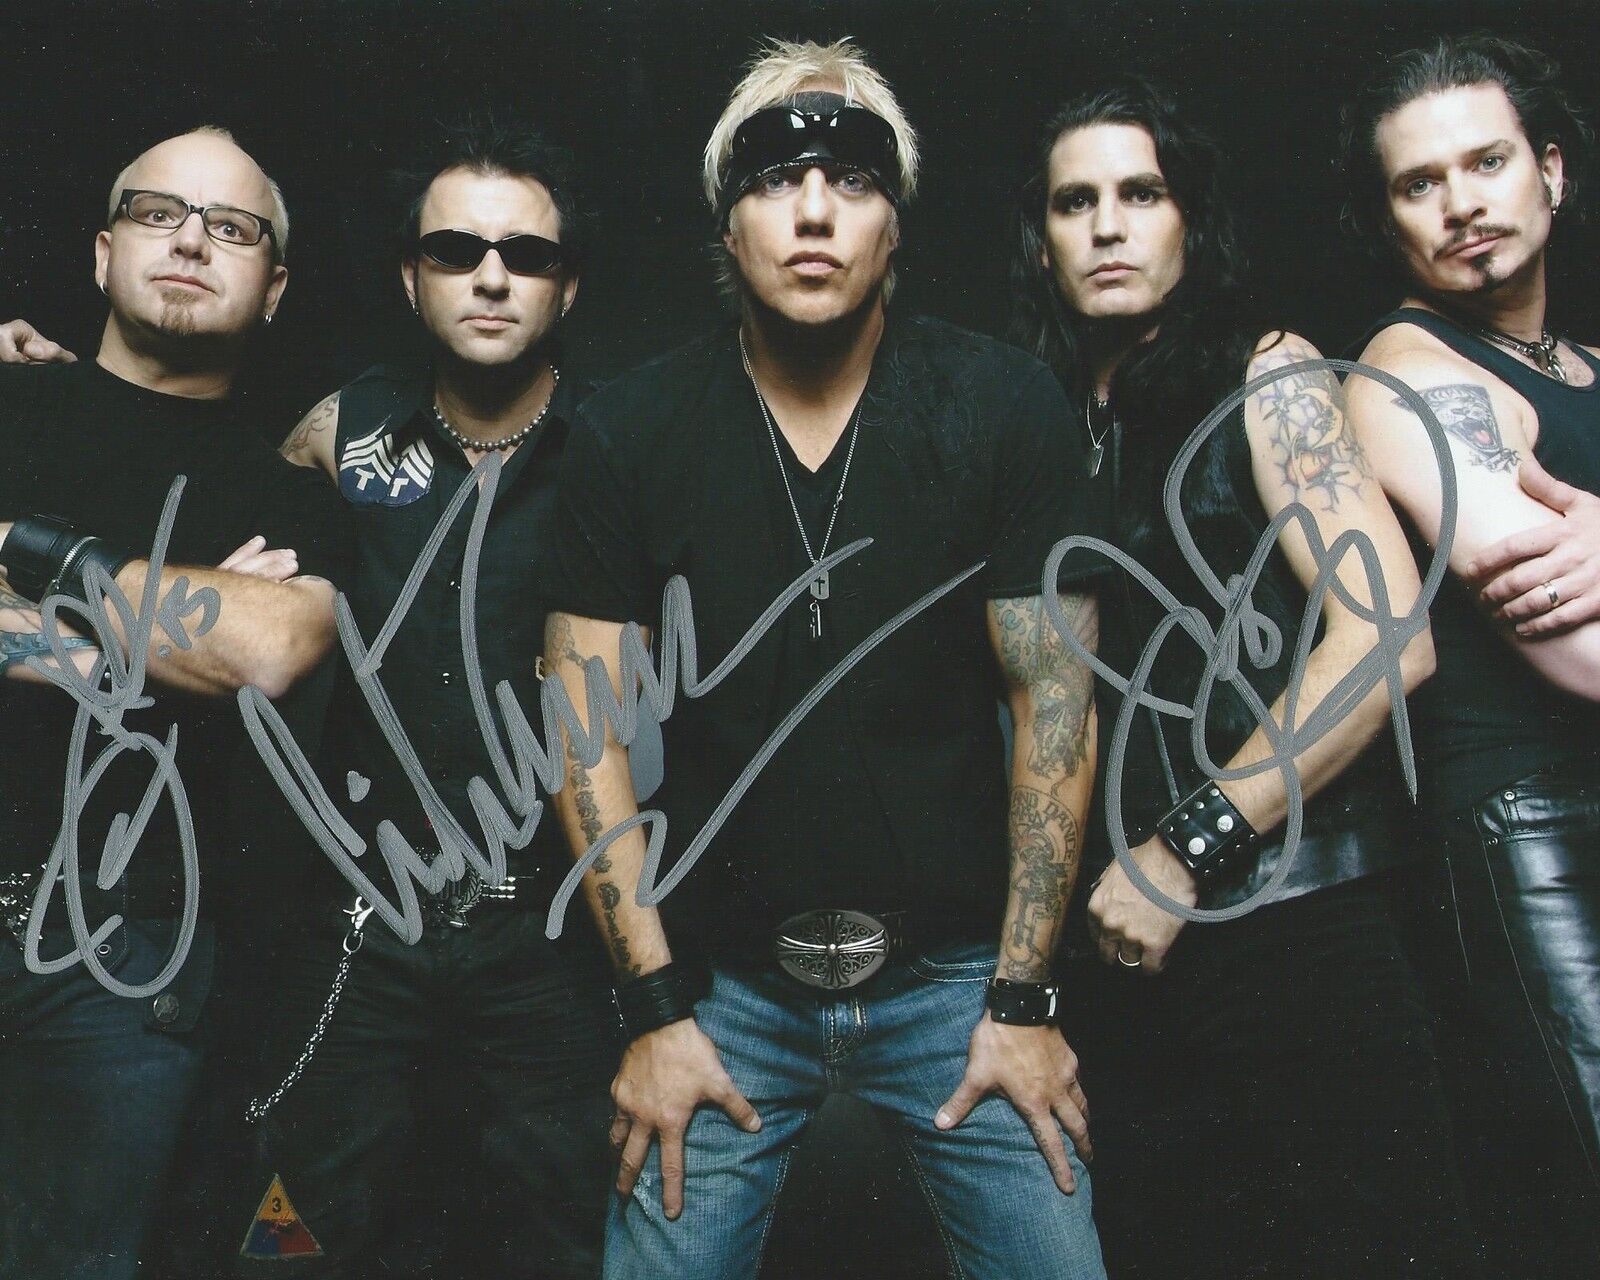 **GFA American Rock Hair Band *WARRANT* Signed 8x10 Photo Poster painting PROOF W6 COA**